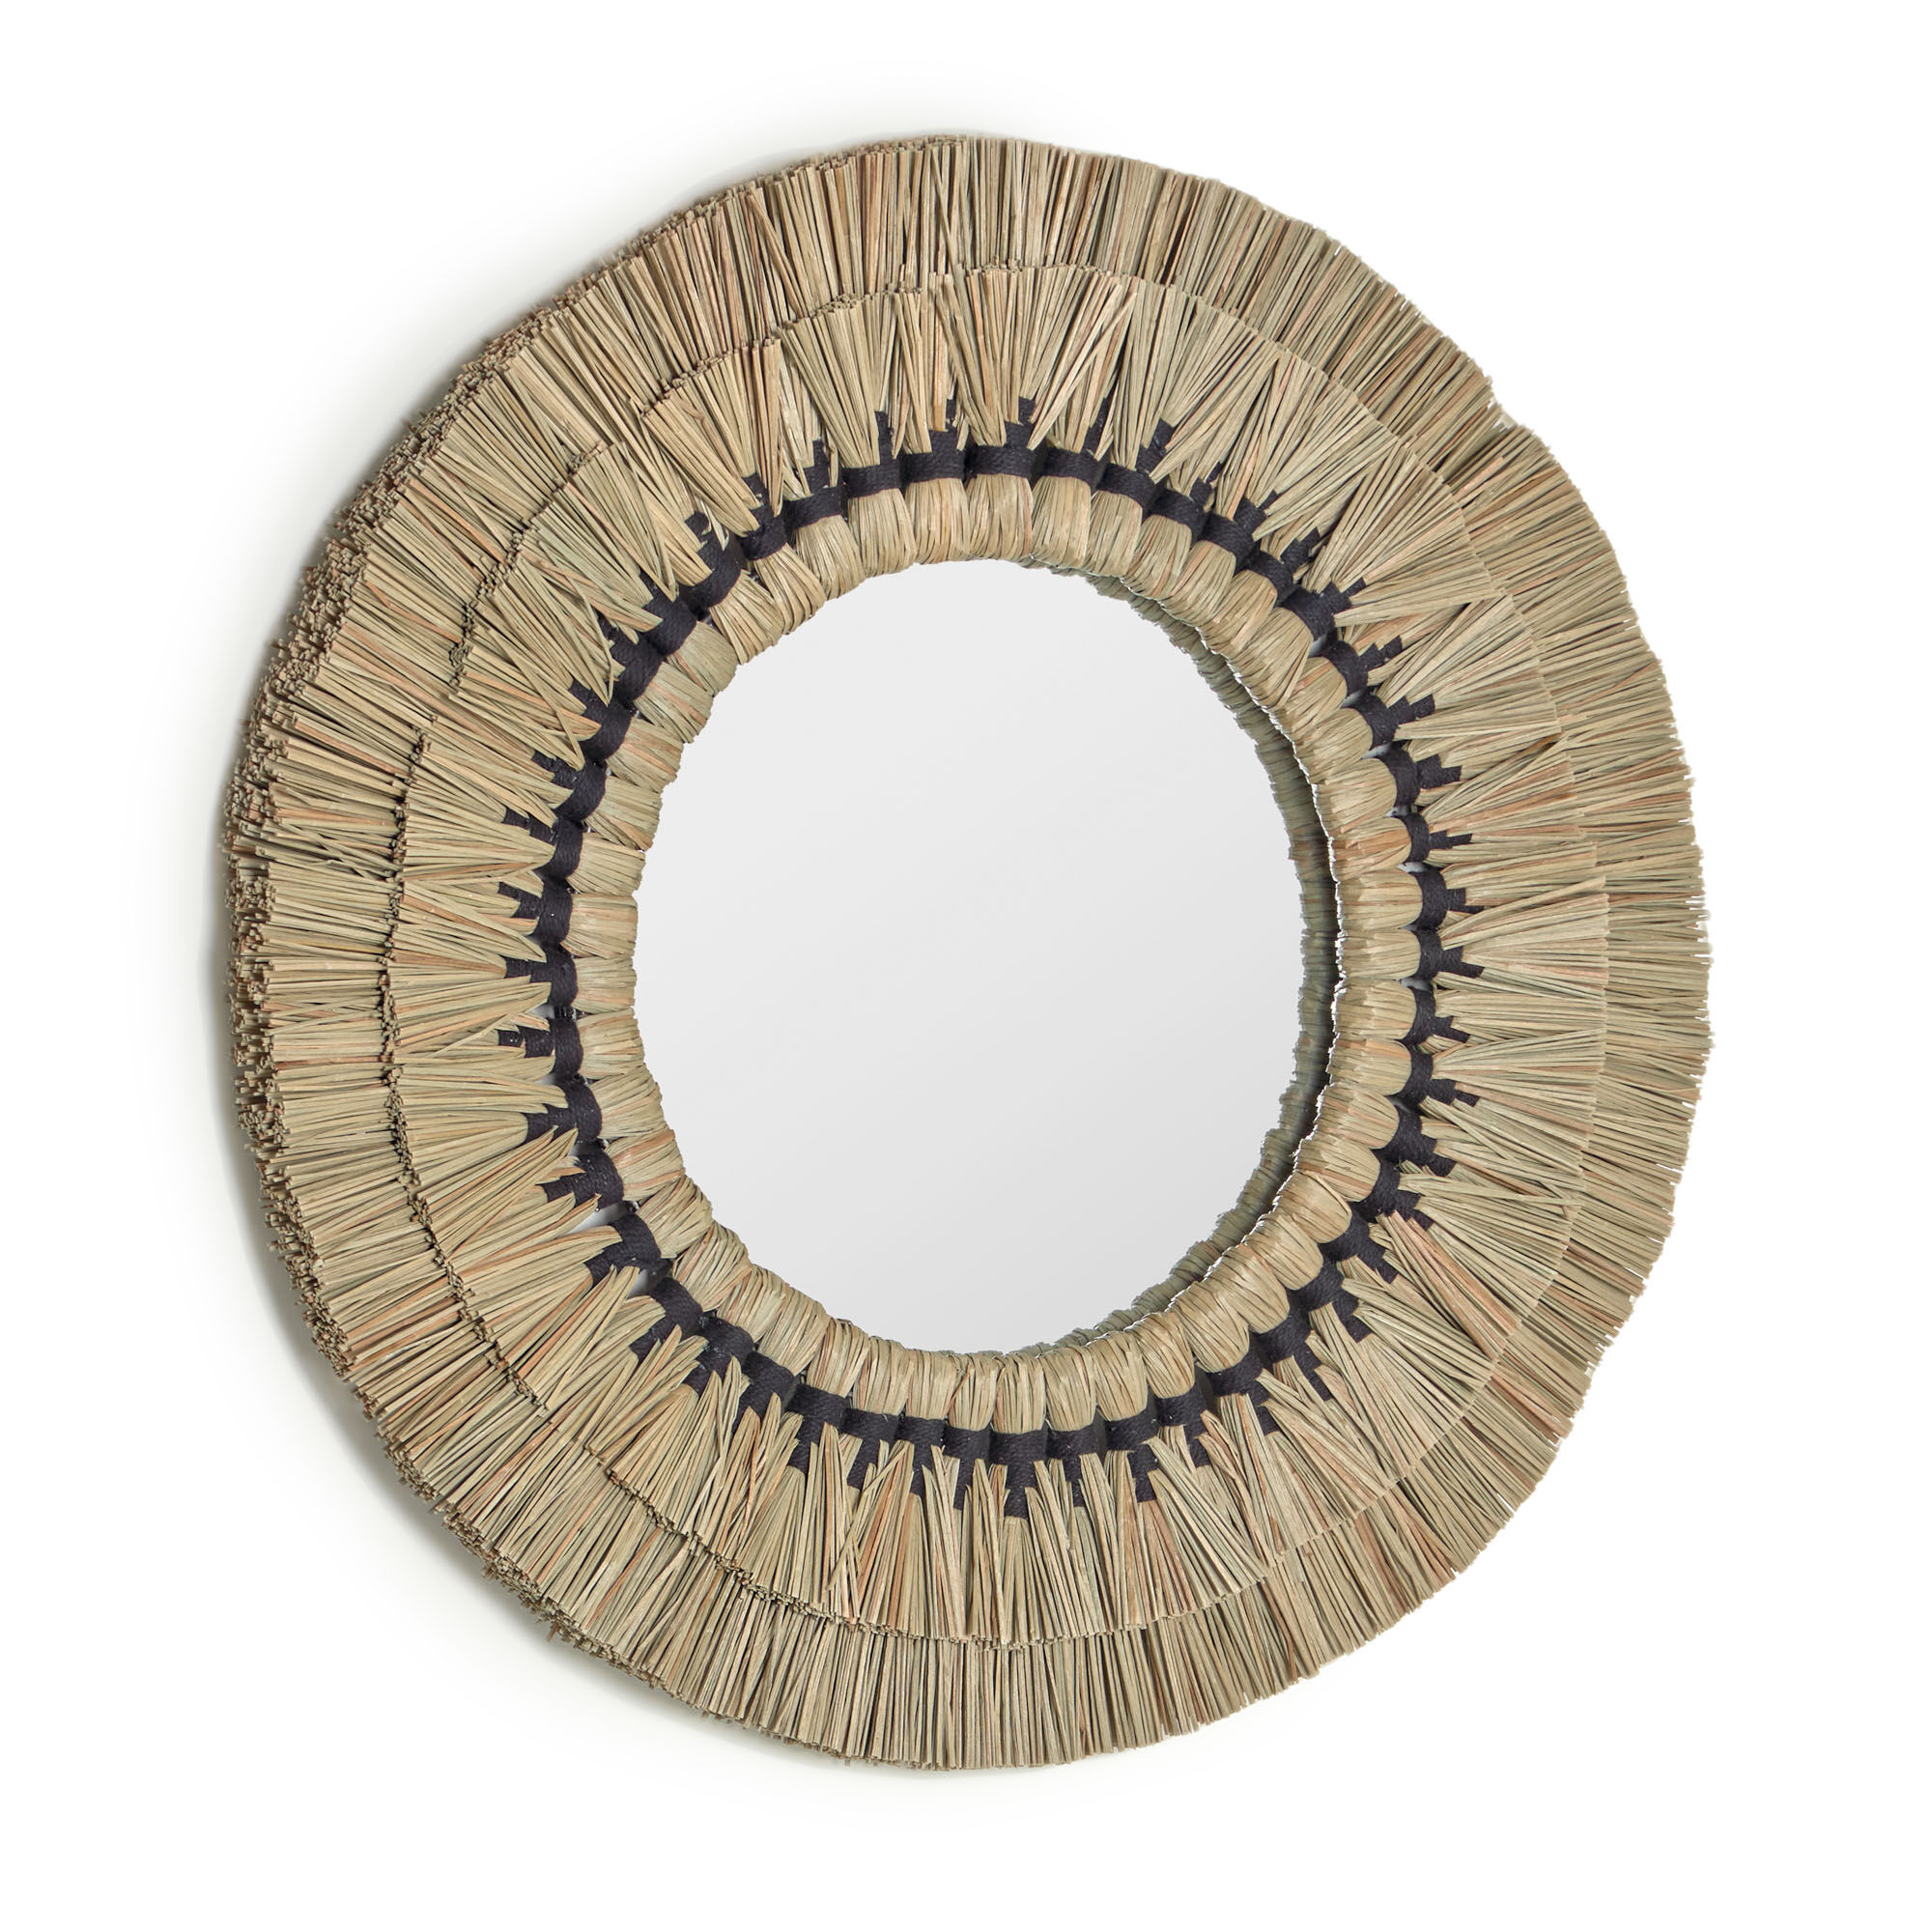 Kave Home Akila round mirror made from beige natural fibres and black cotton cord, 60 cm